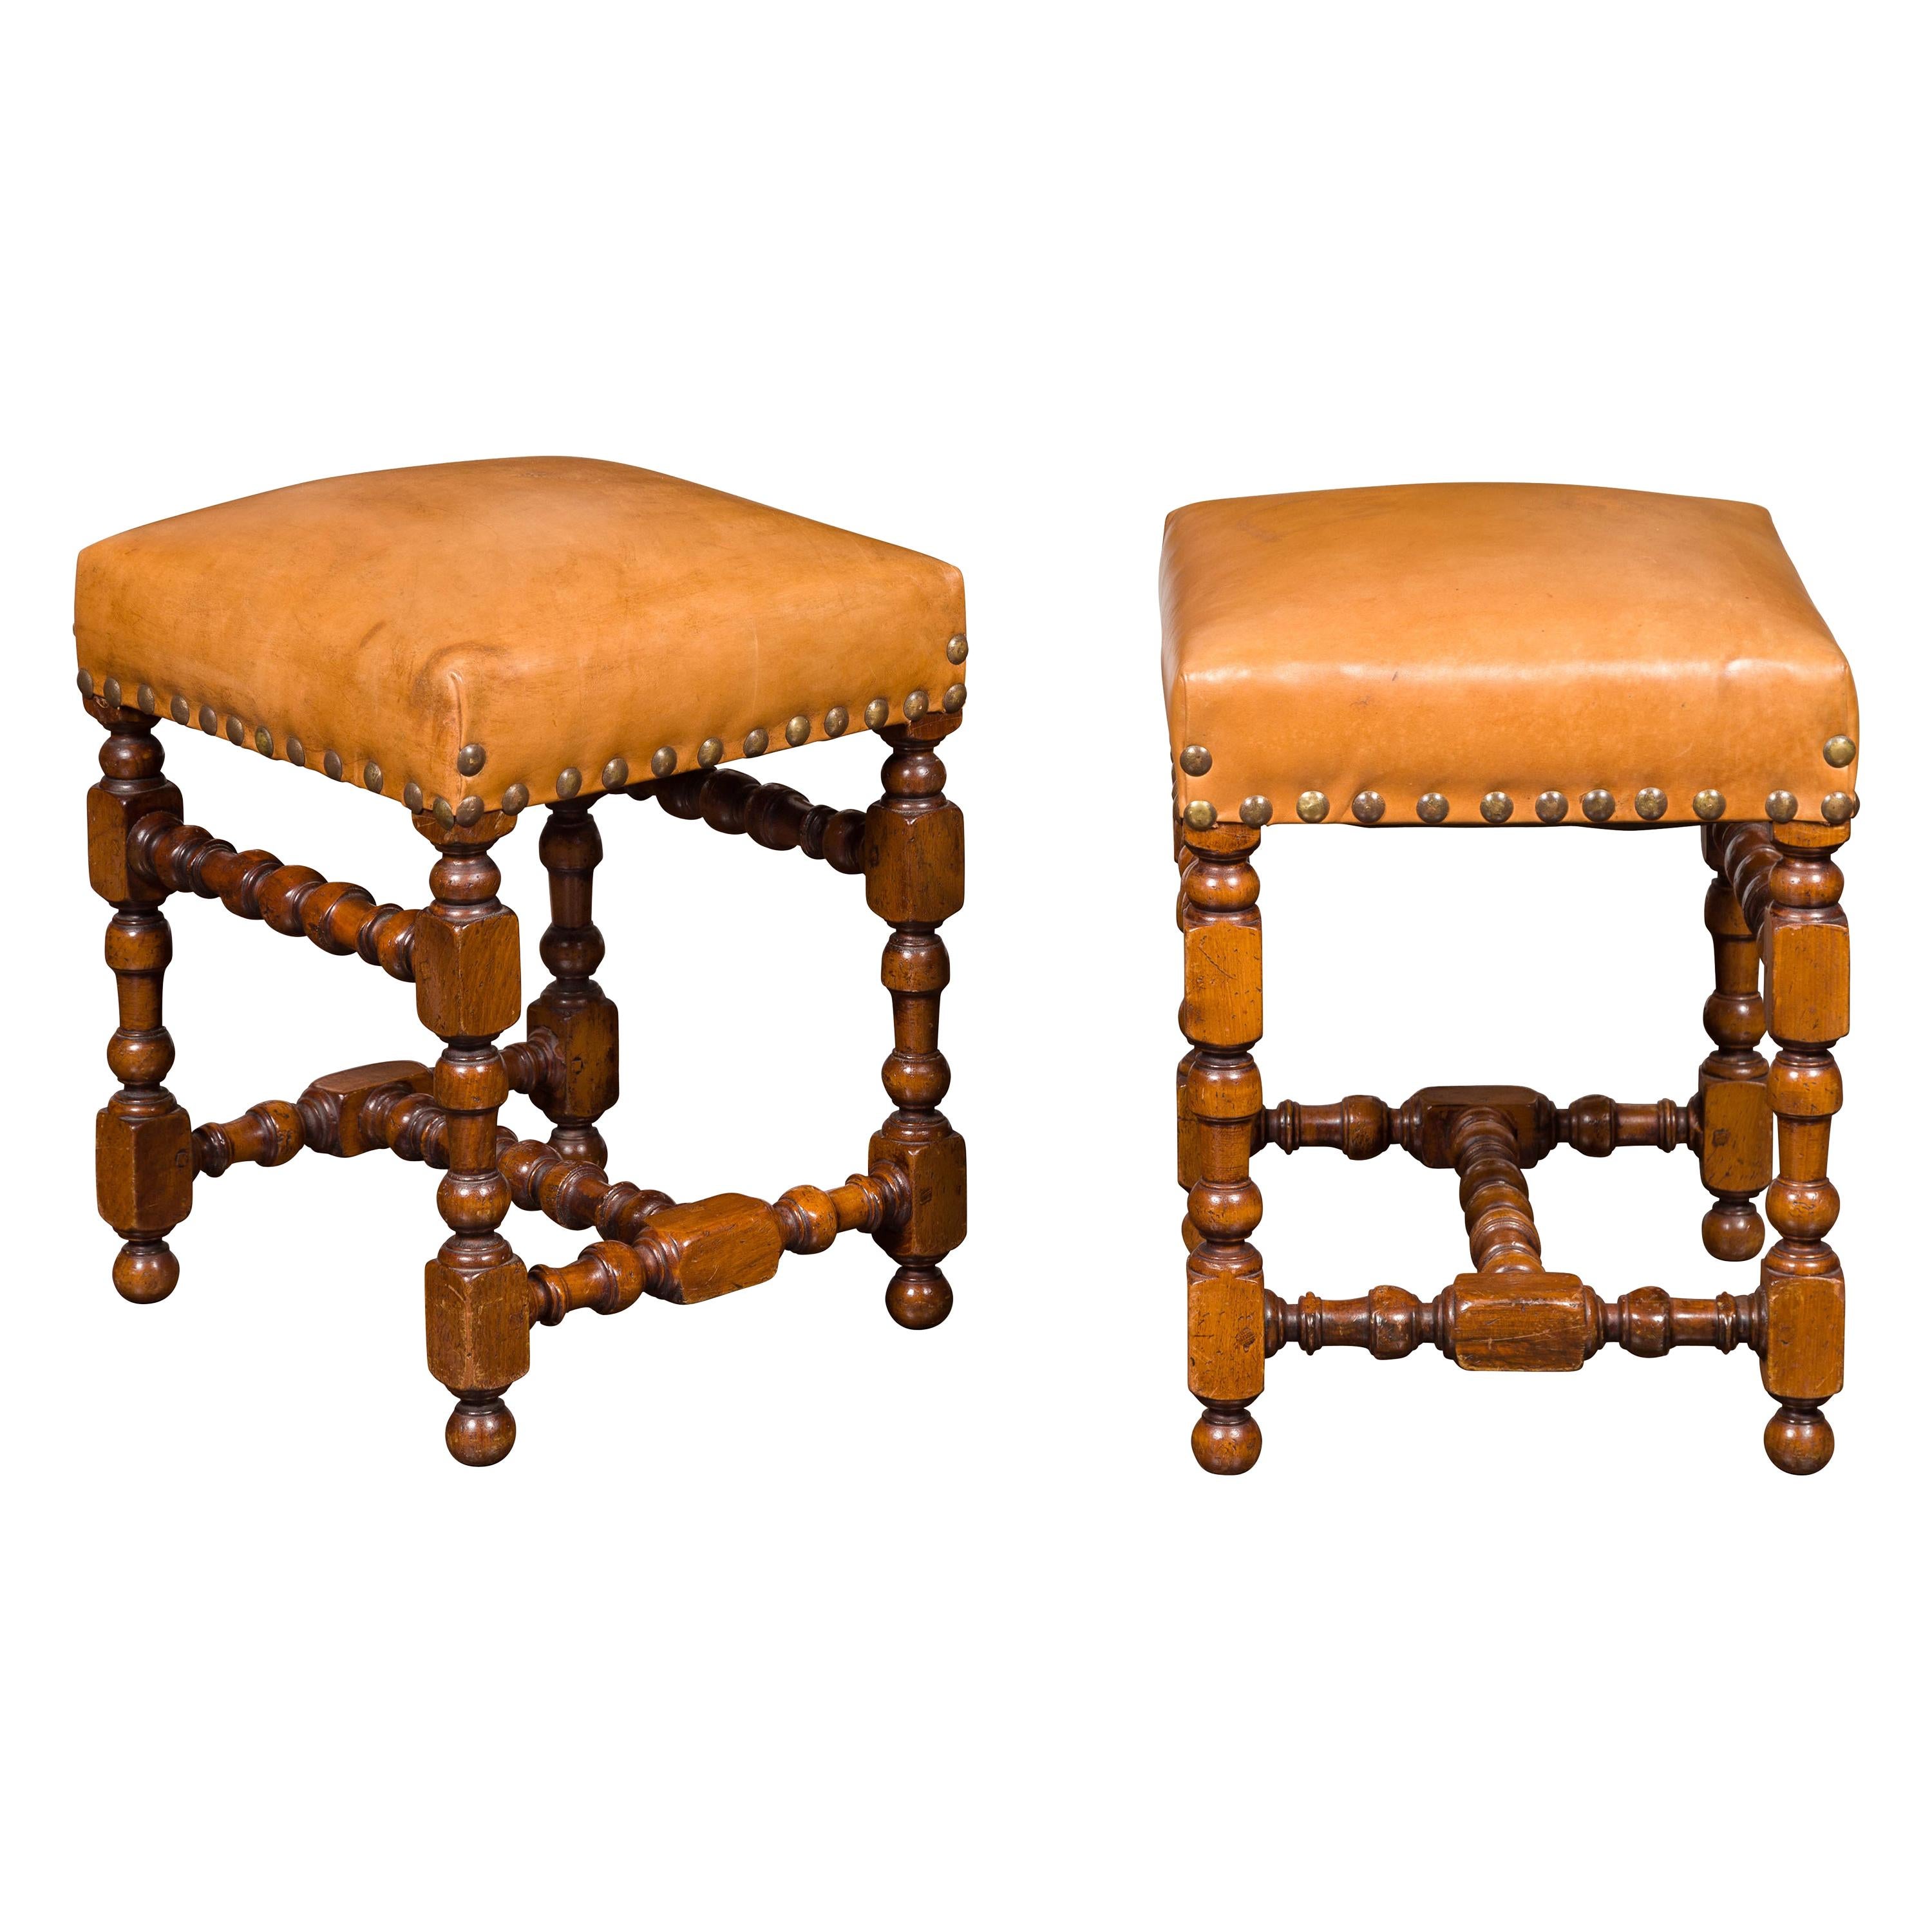 Pair of Italian 1850s Walnut Stools with Leather Top, Turned Legs and Stretcher